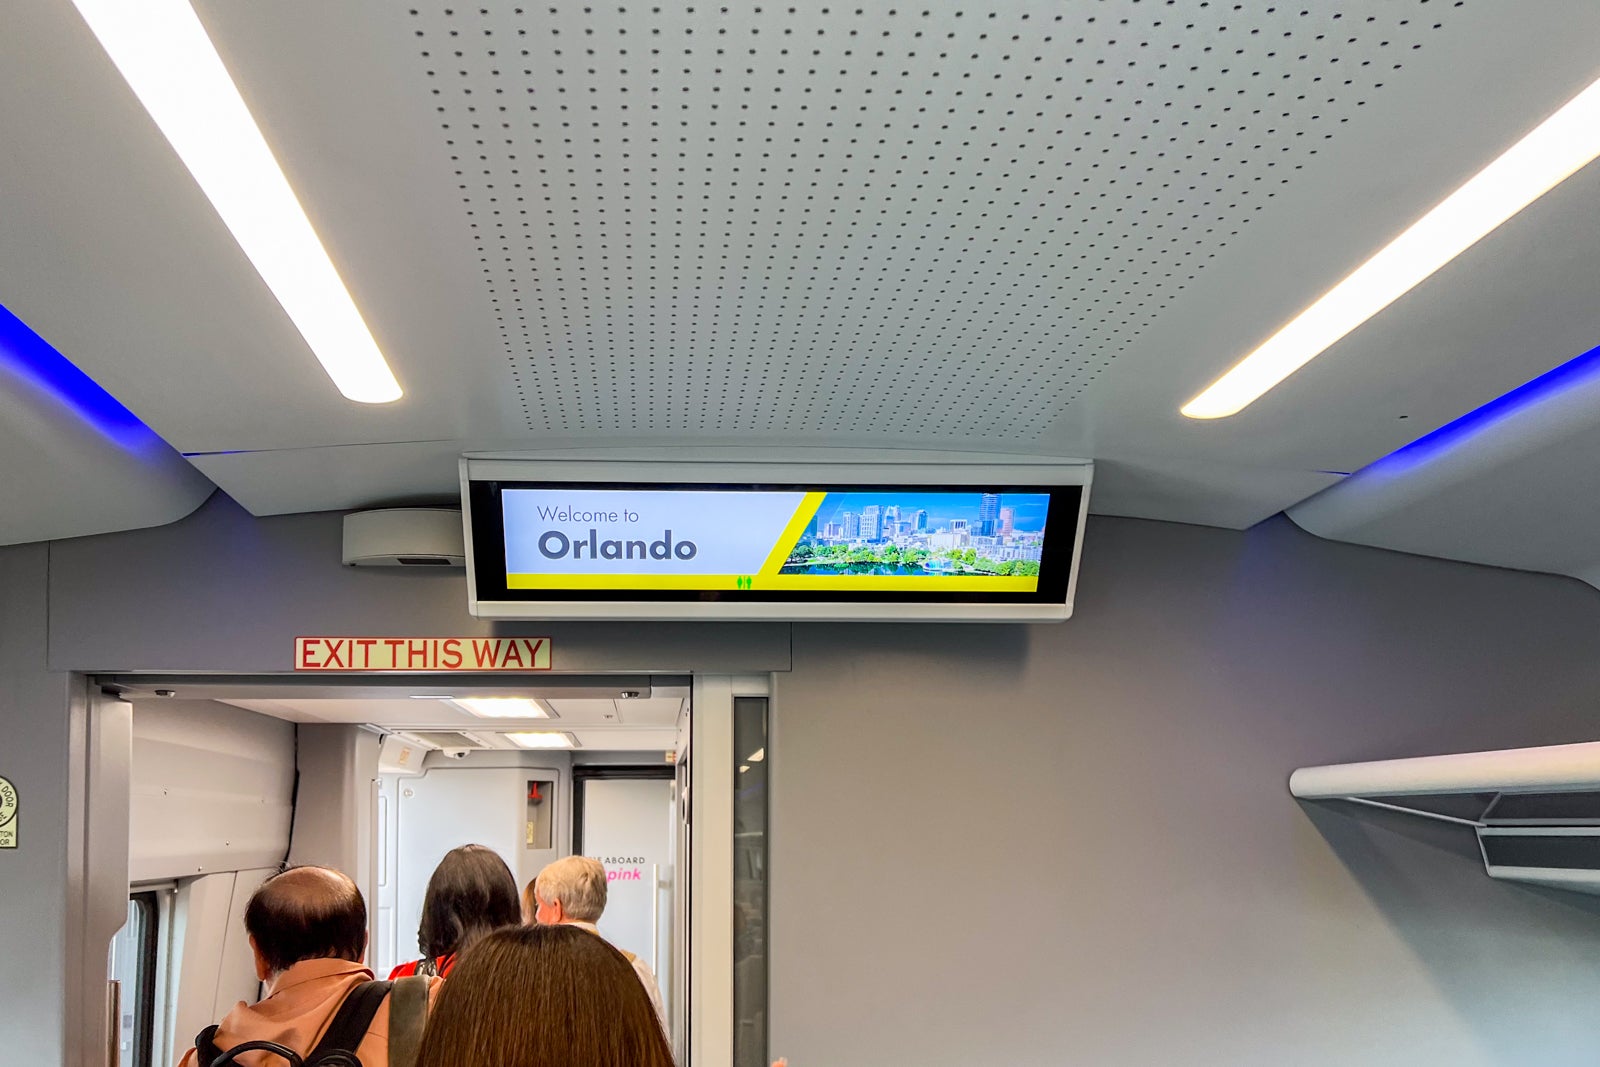 The onboard sign announcing Brightline's arrival into Orlando